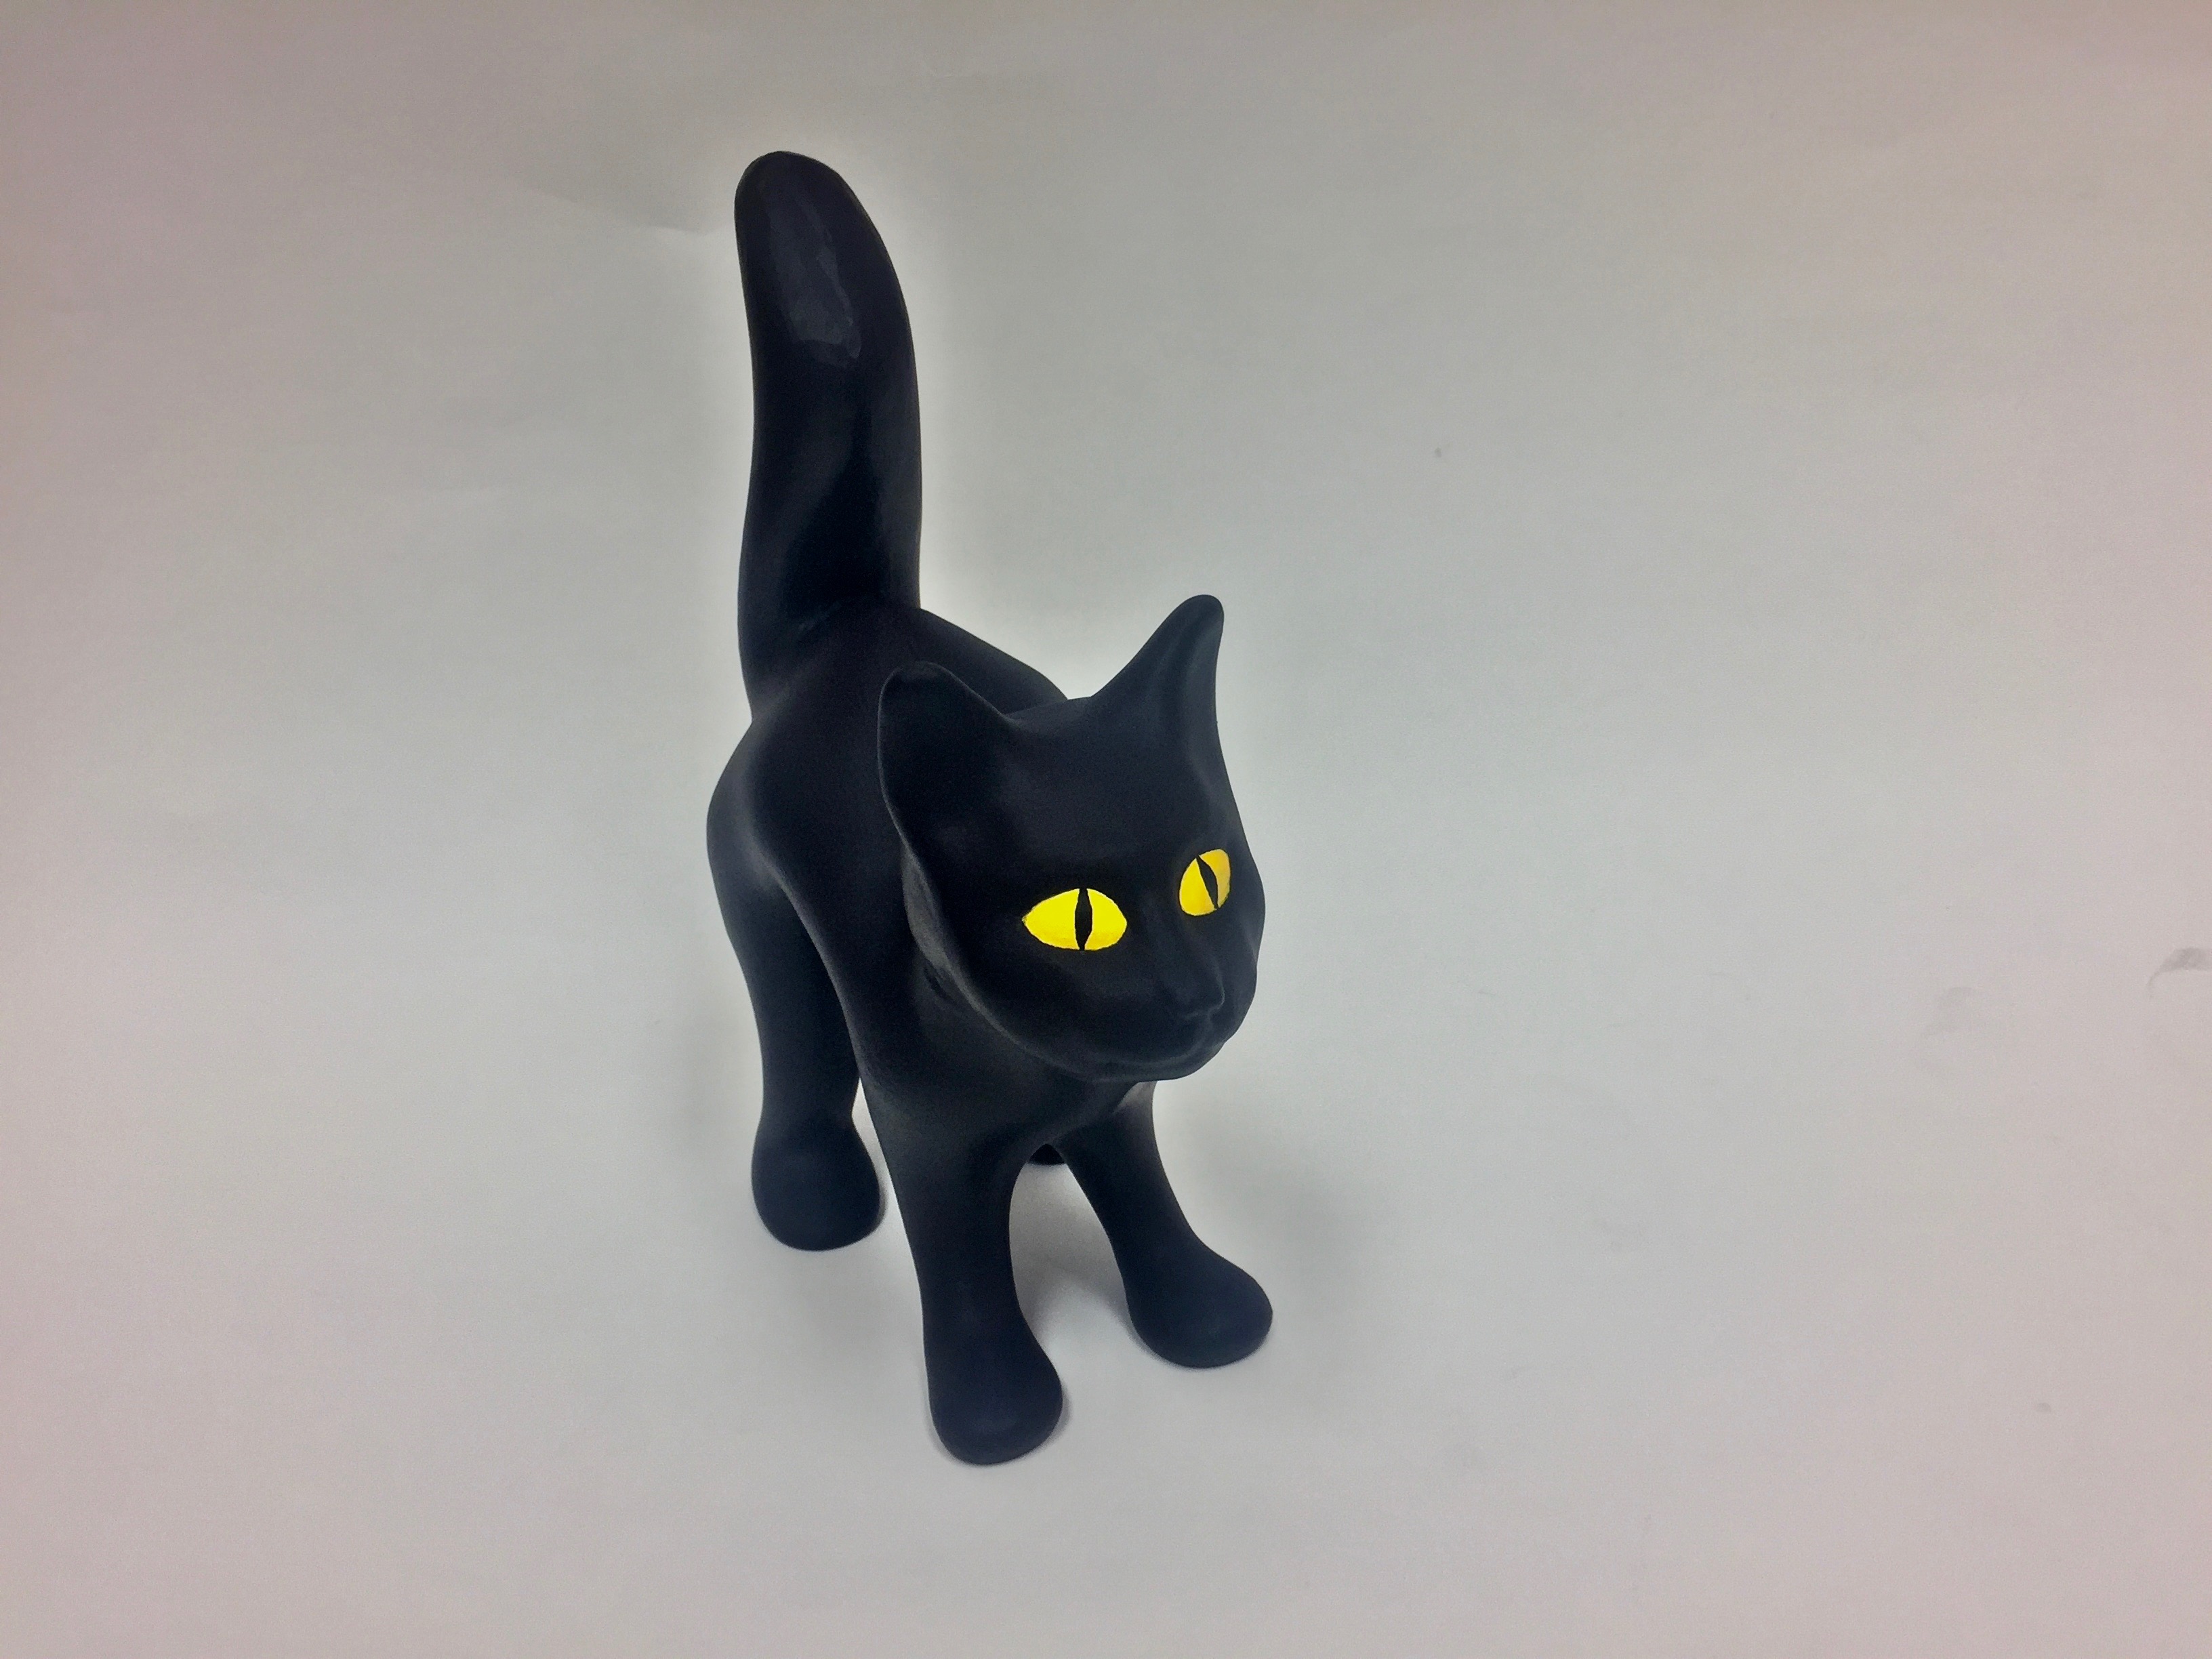 The 3D  Printed Black Cat  Realize Inc